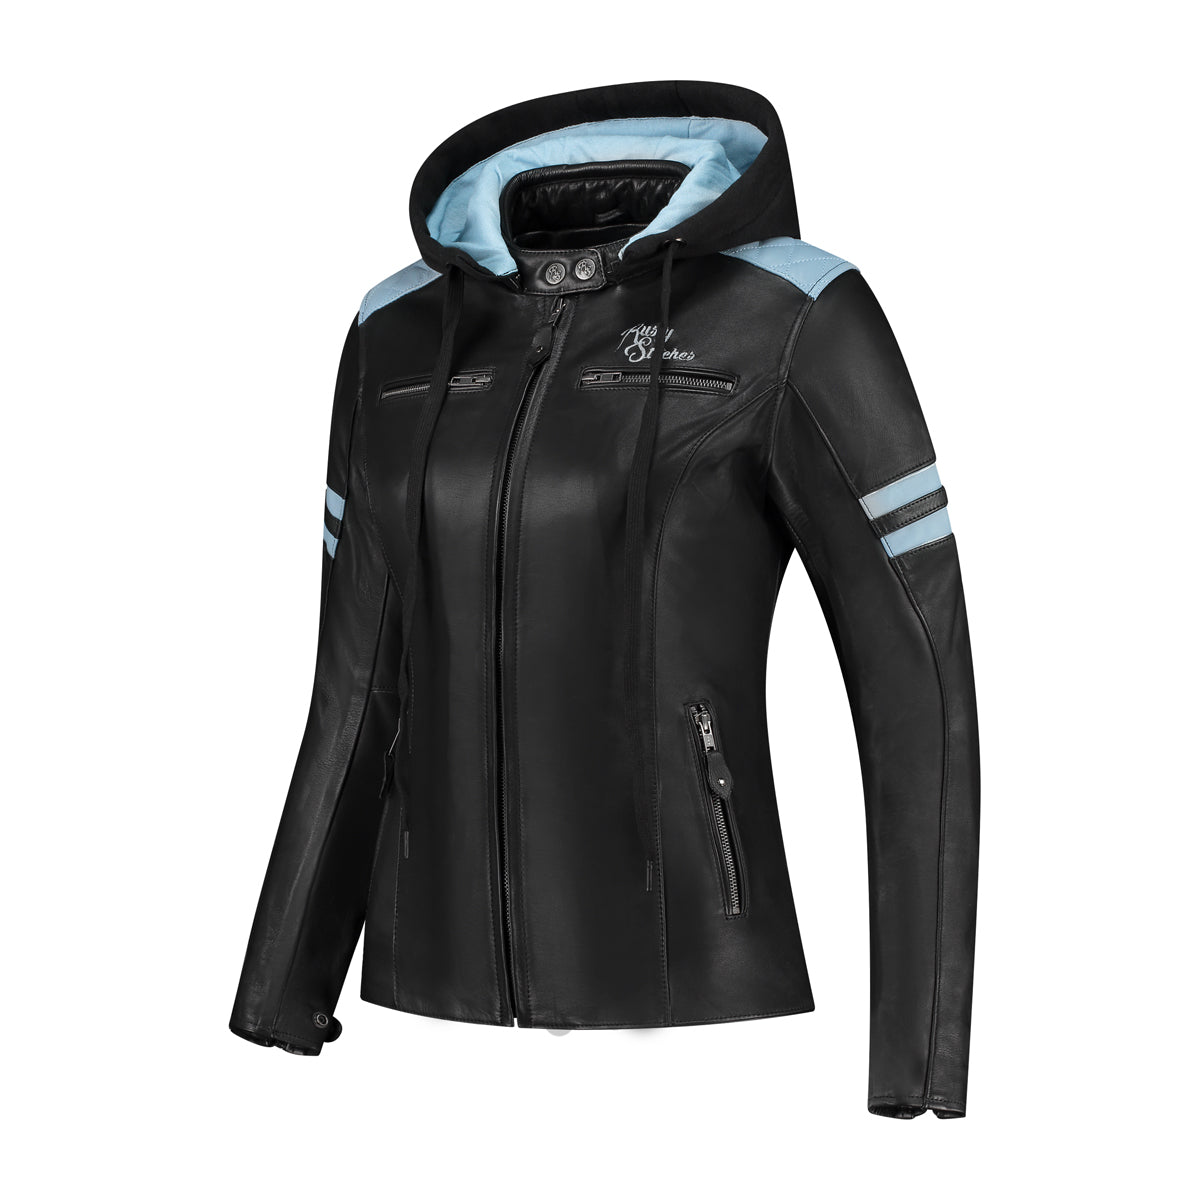 Black and baby blue women's leather motorcycle jacket with the hood from Rusty Stiches 